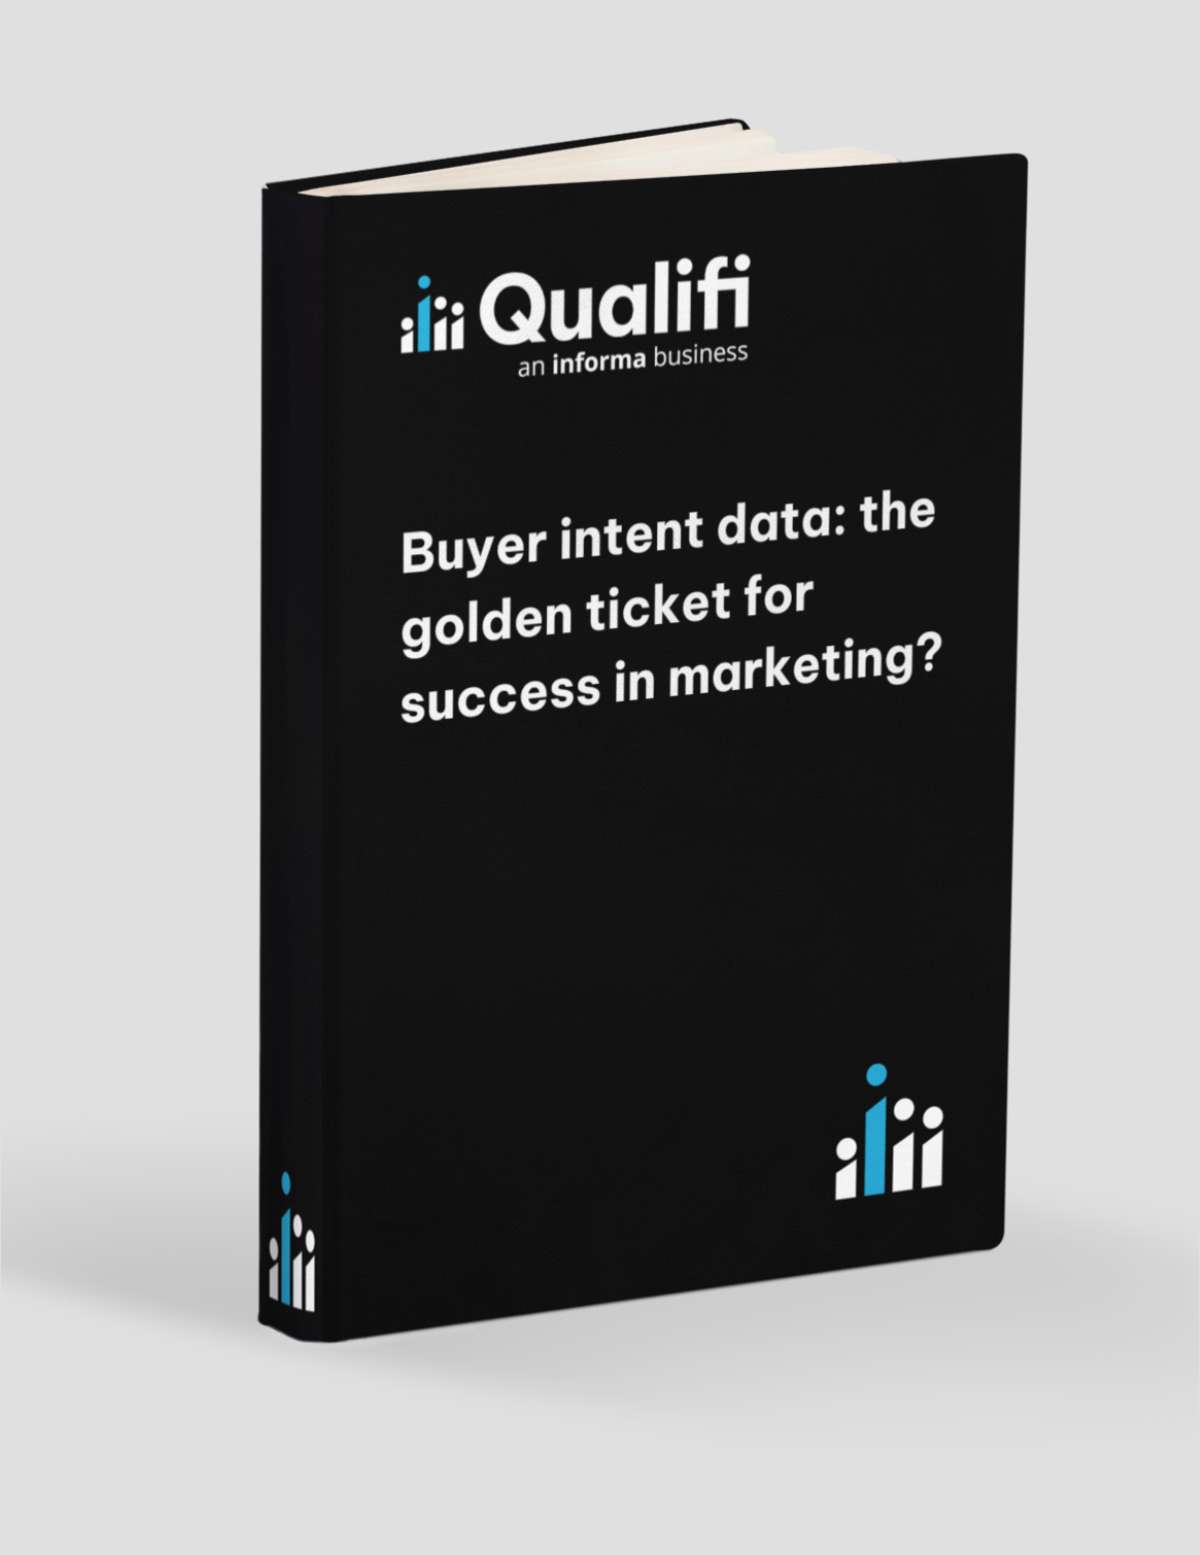 Buyer intent data: the golden ticket to success for marketing?